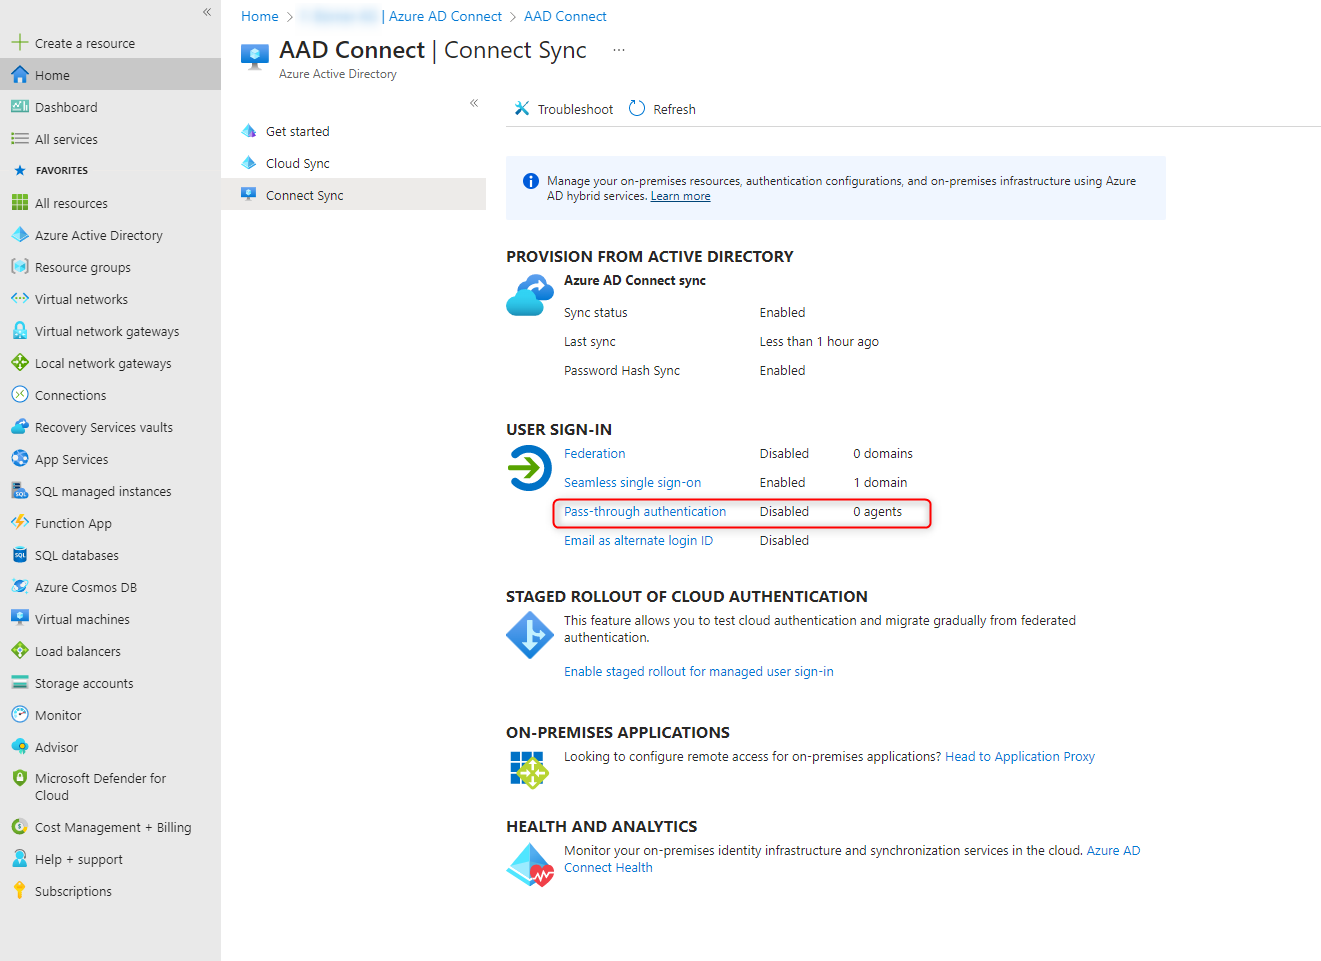 Azure AD Connect - Overview